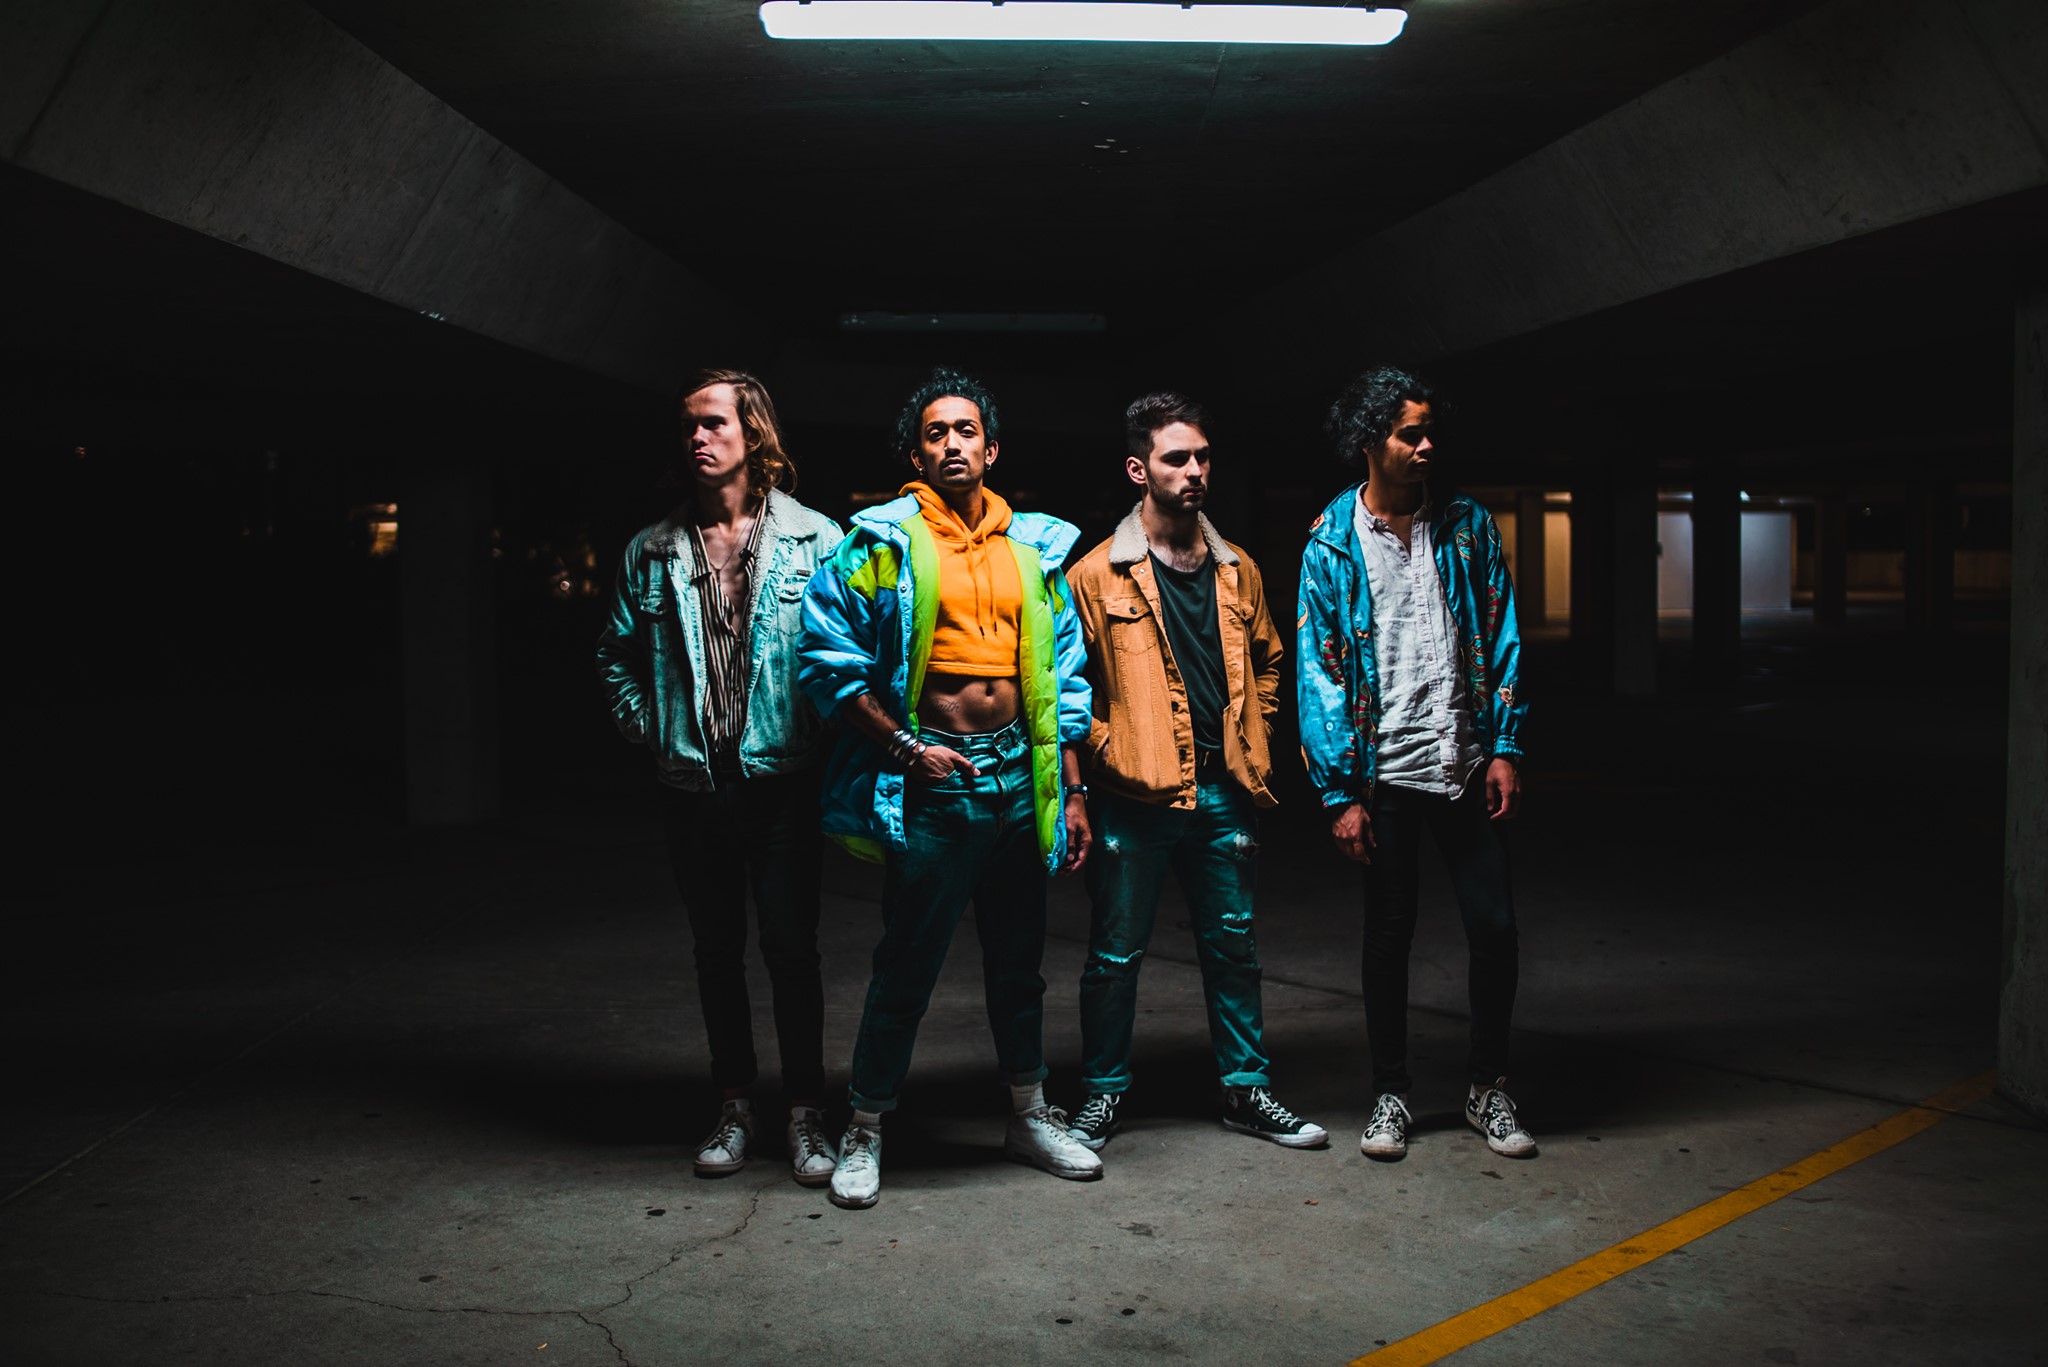 OPENFIRE. ANNOUNCE NEW SINGLE MOVE ME